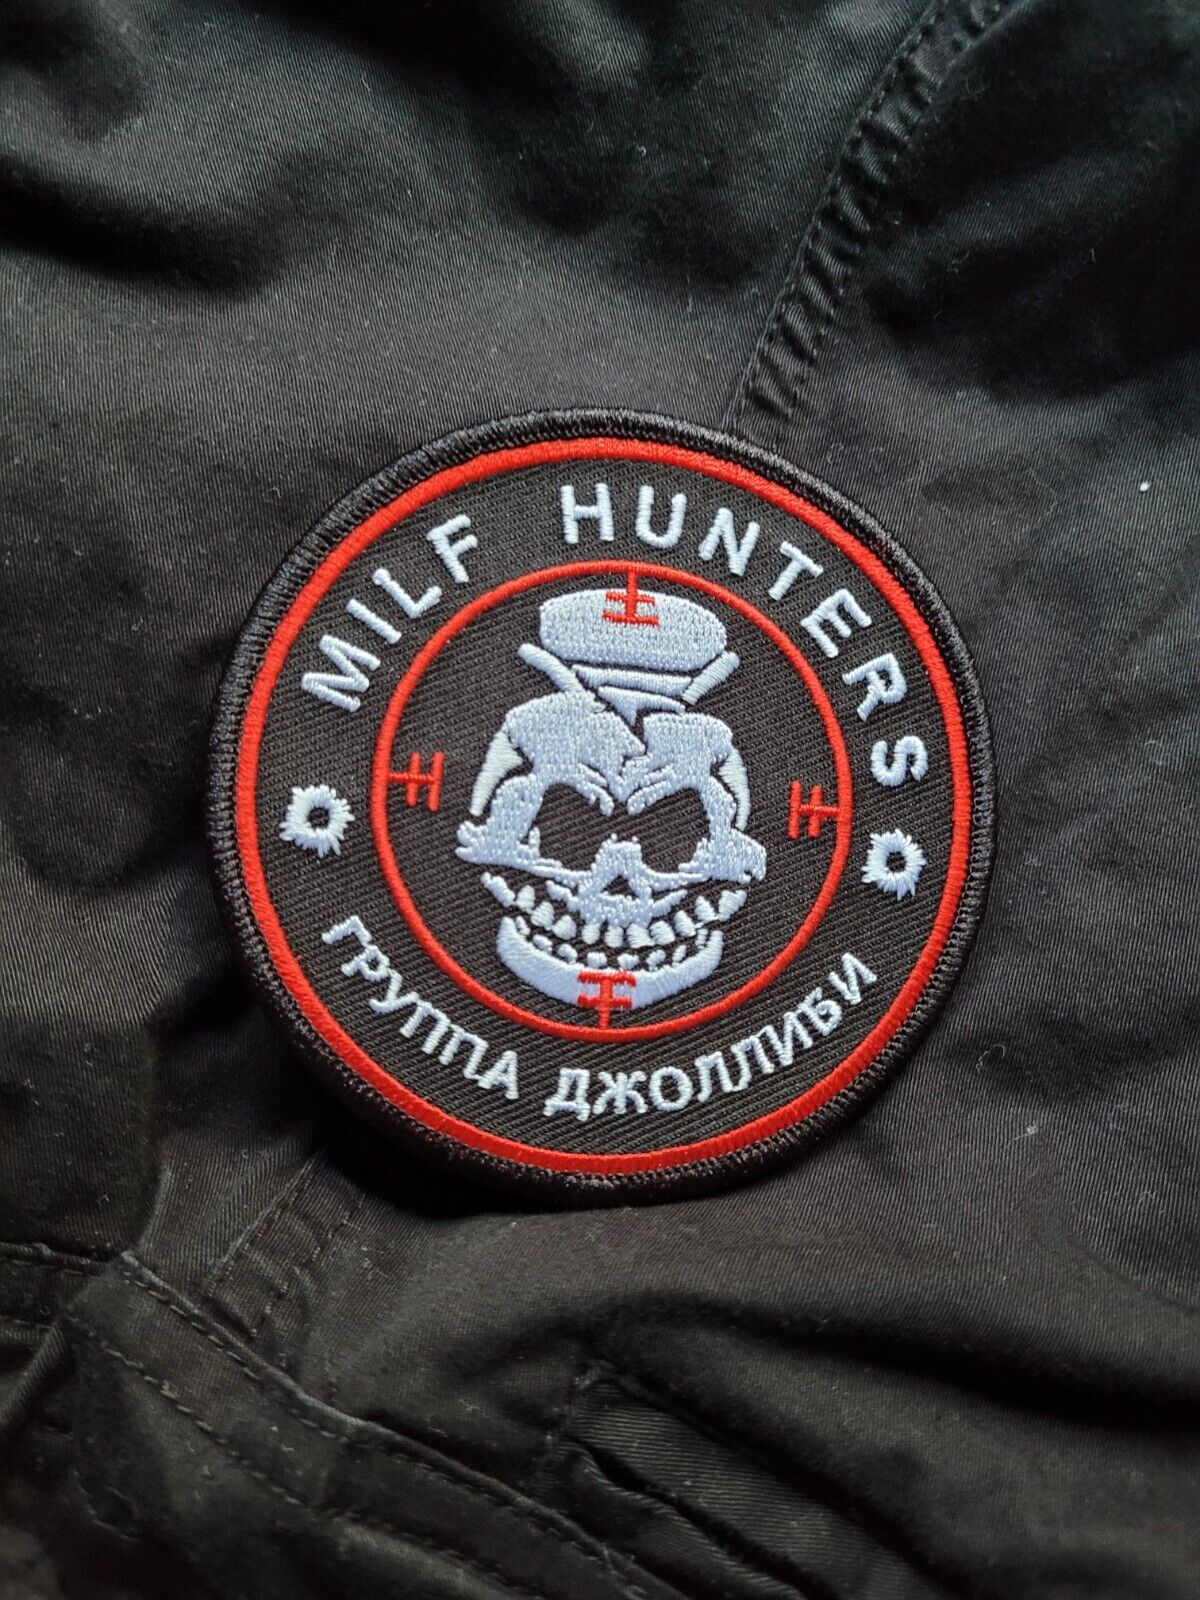 Armed Forces of the Philippines (AFP), Jollibee PMC morale airsoft war patch